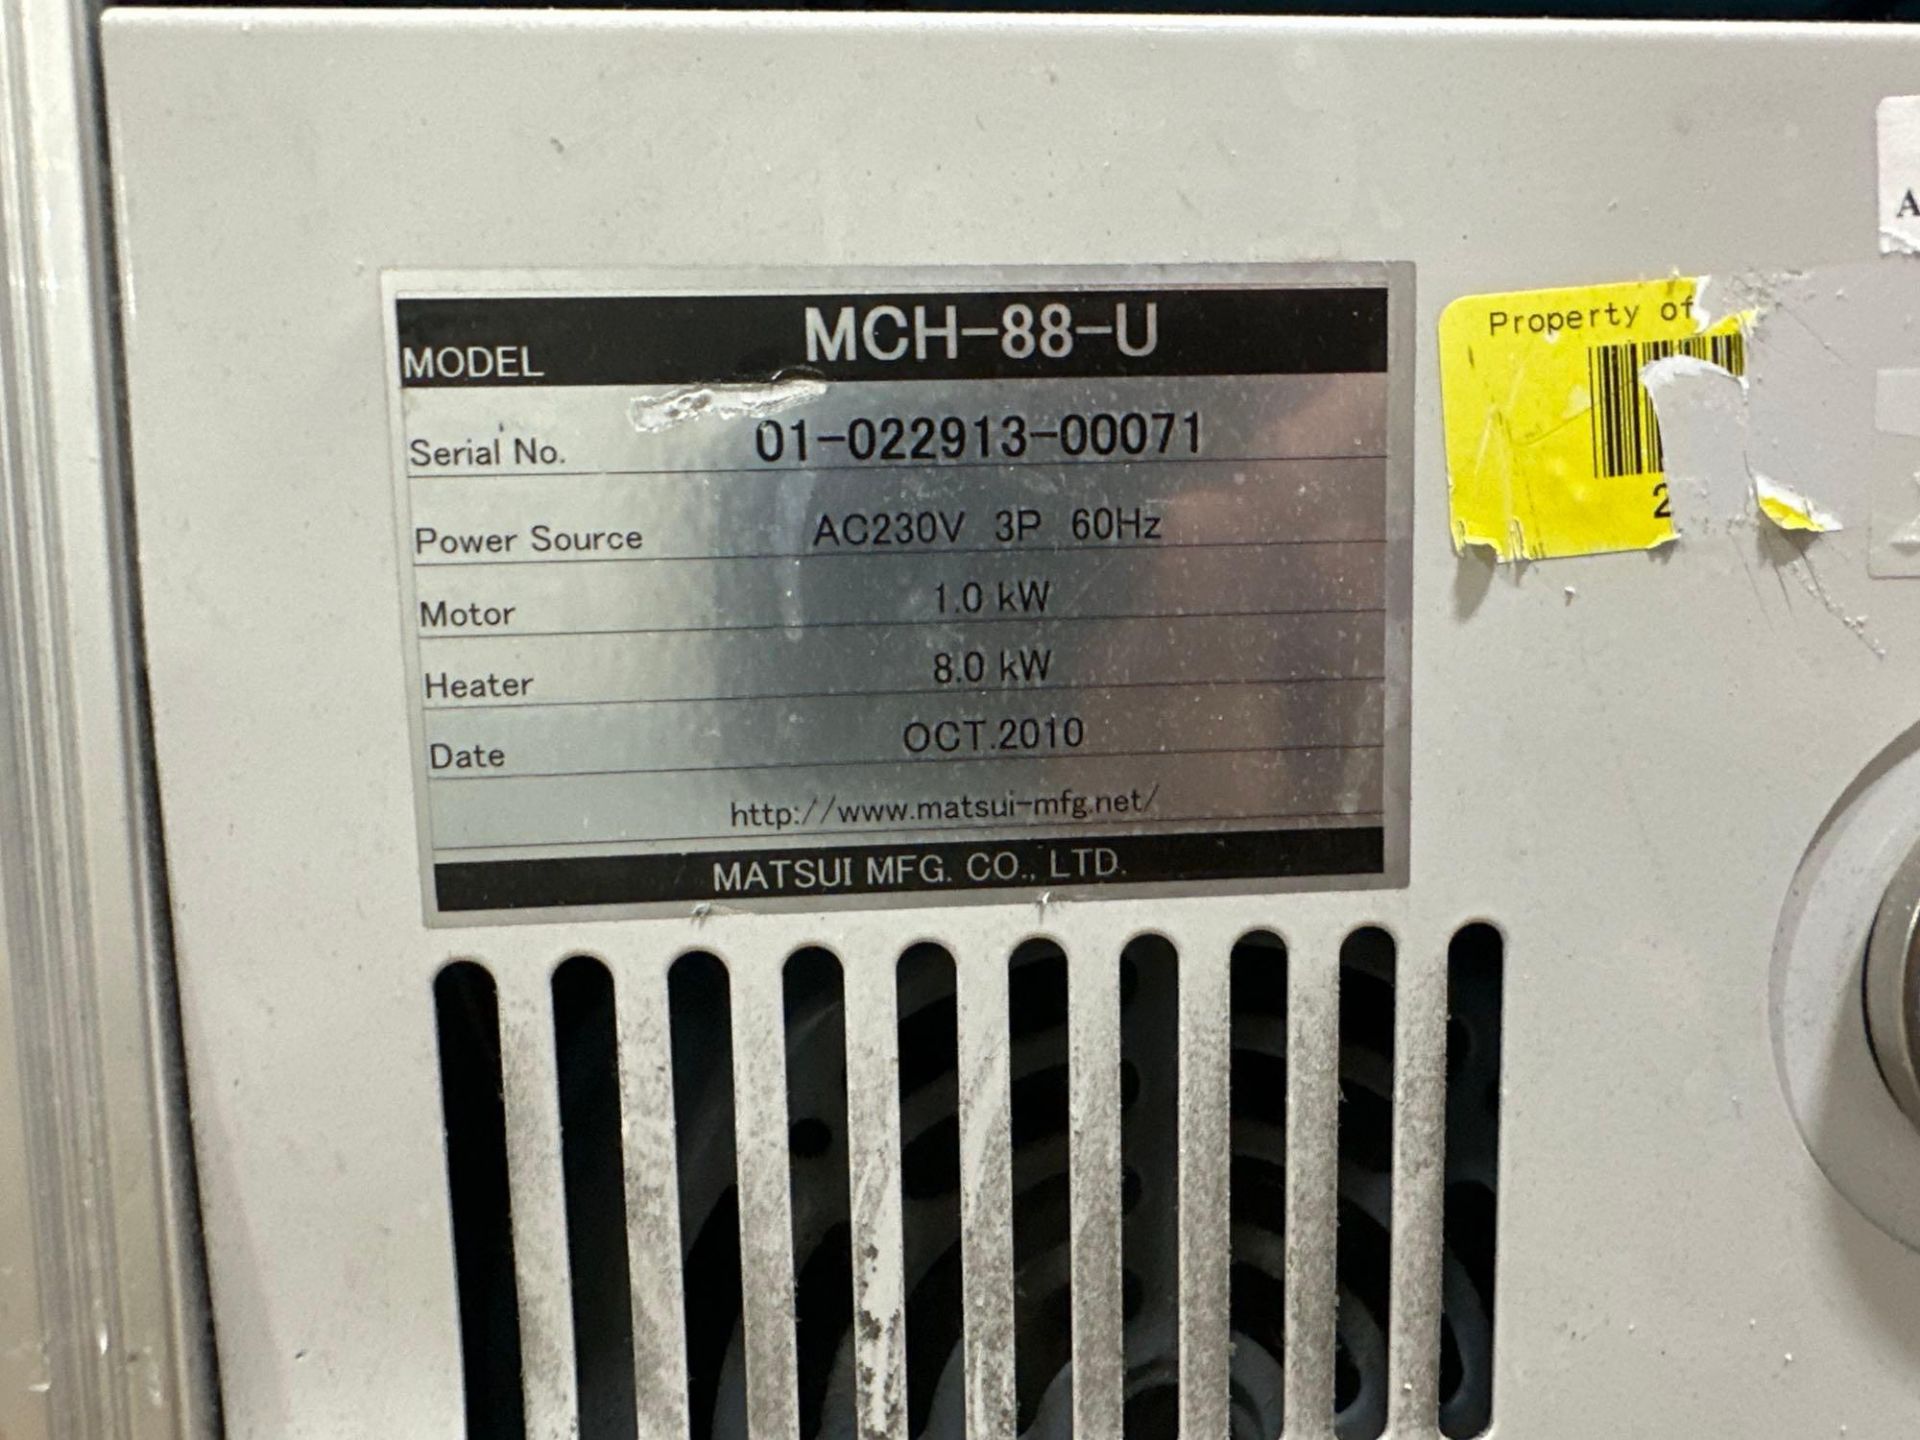 Matsui MCH-88-U Thermolator, 24gpm, 57psi, 248F, Equipped With: Alarm Lamp and Buzzer - Image 12 of 12